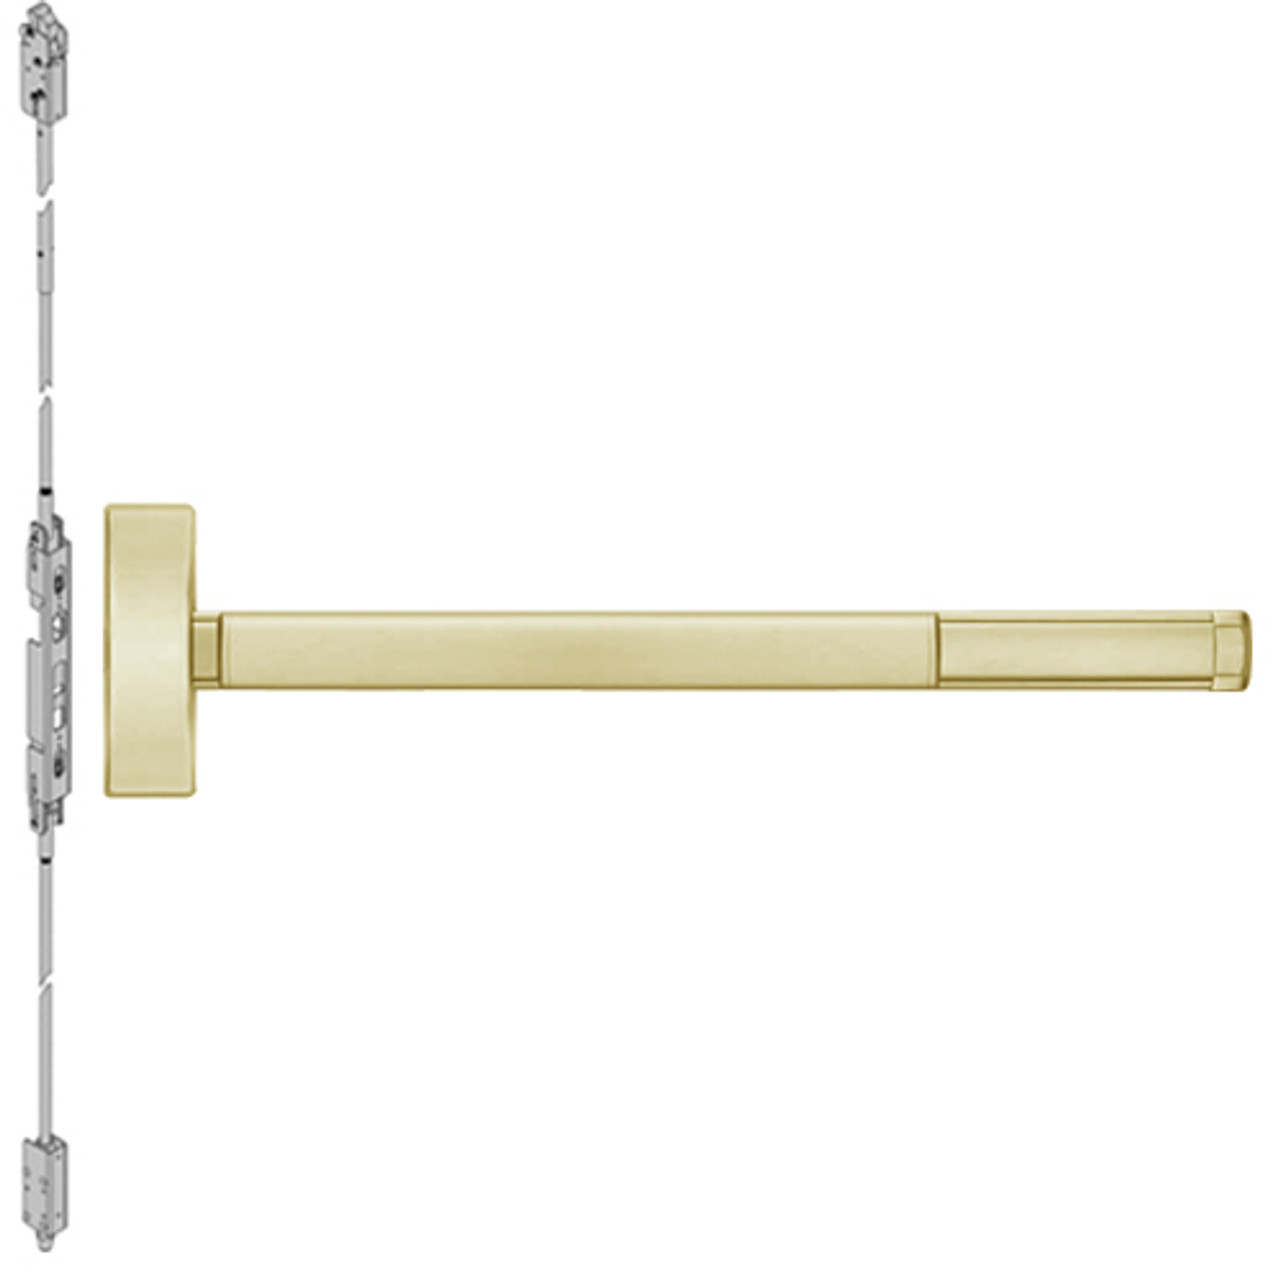 ELRFL2808LBR-606-48 PHI 2800 Series Fire Rated Concealed Vertical Rod Exit Device with Electric Latch Retraction Prepped for Key Controls Lever-Knob in Satin Brass Finish